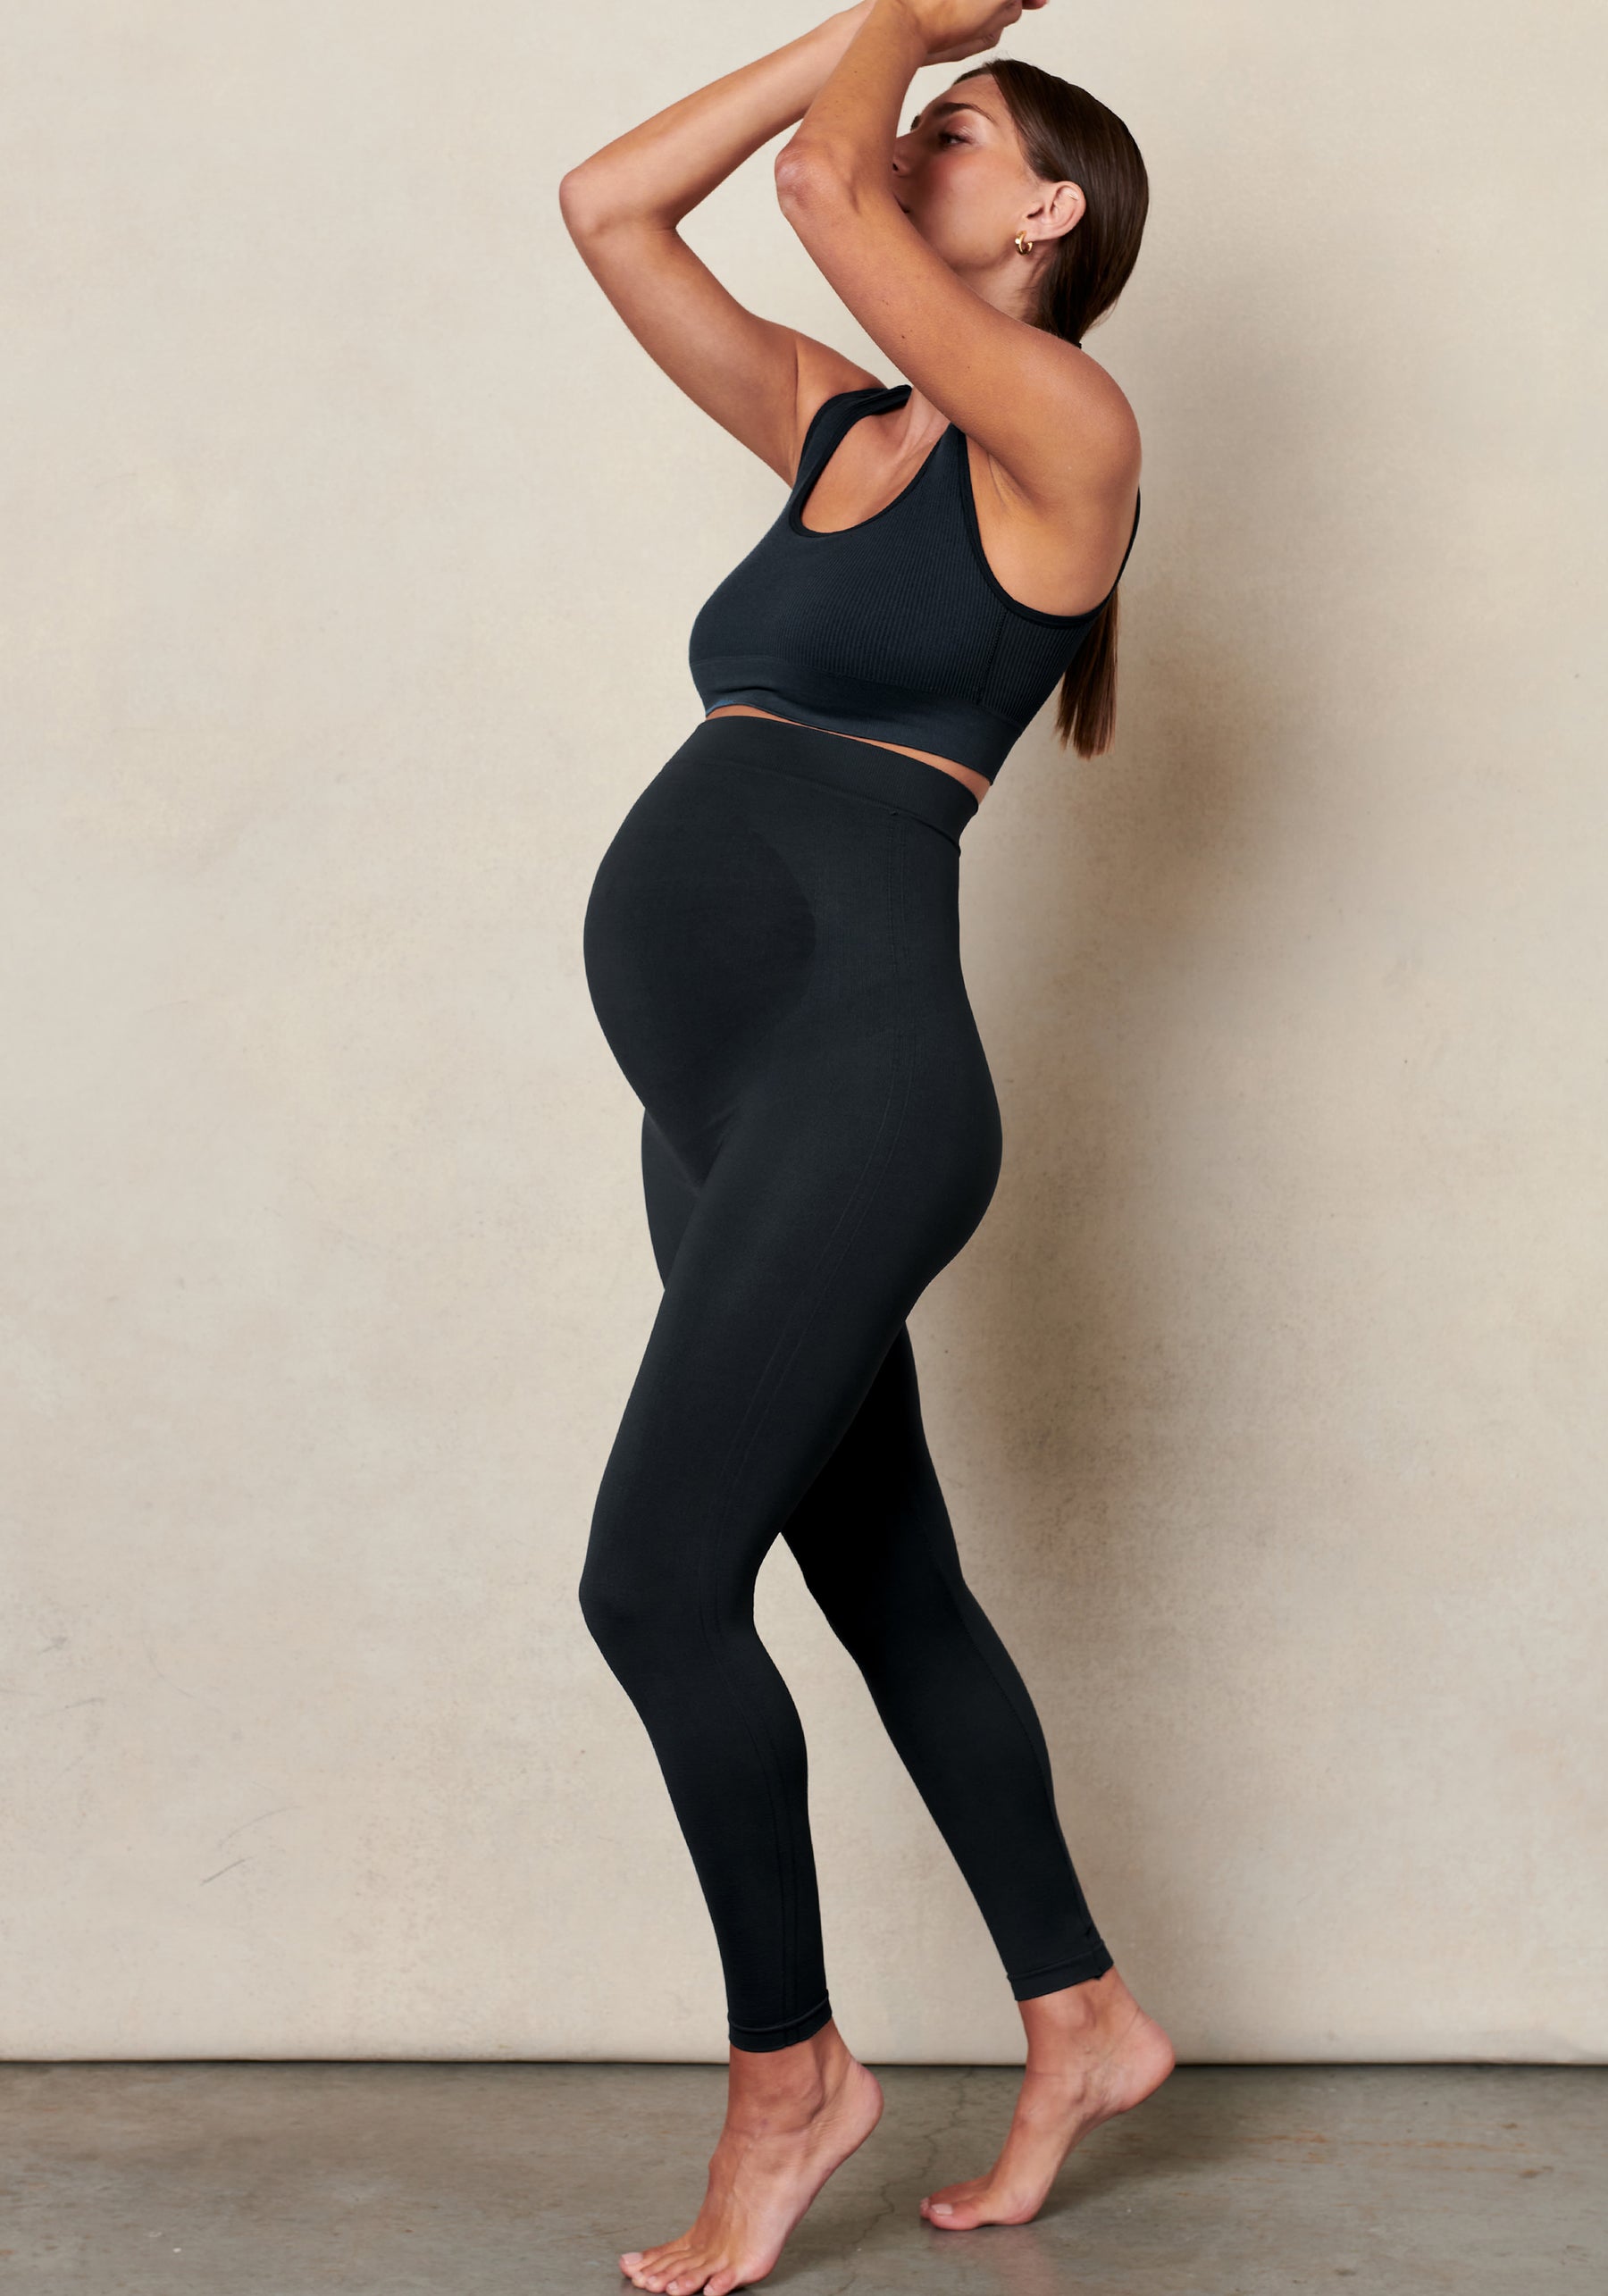 Blanqi Everyday Maternity Belly Support Leggings